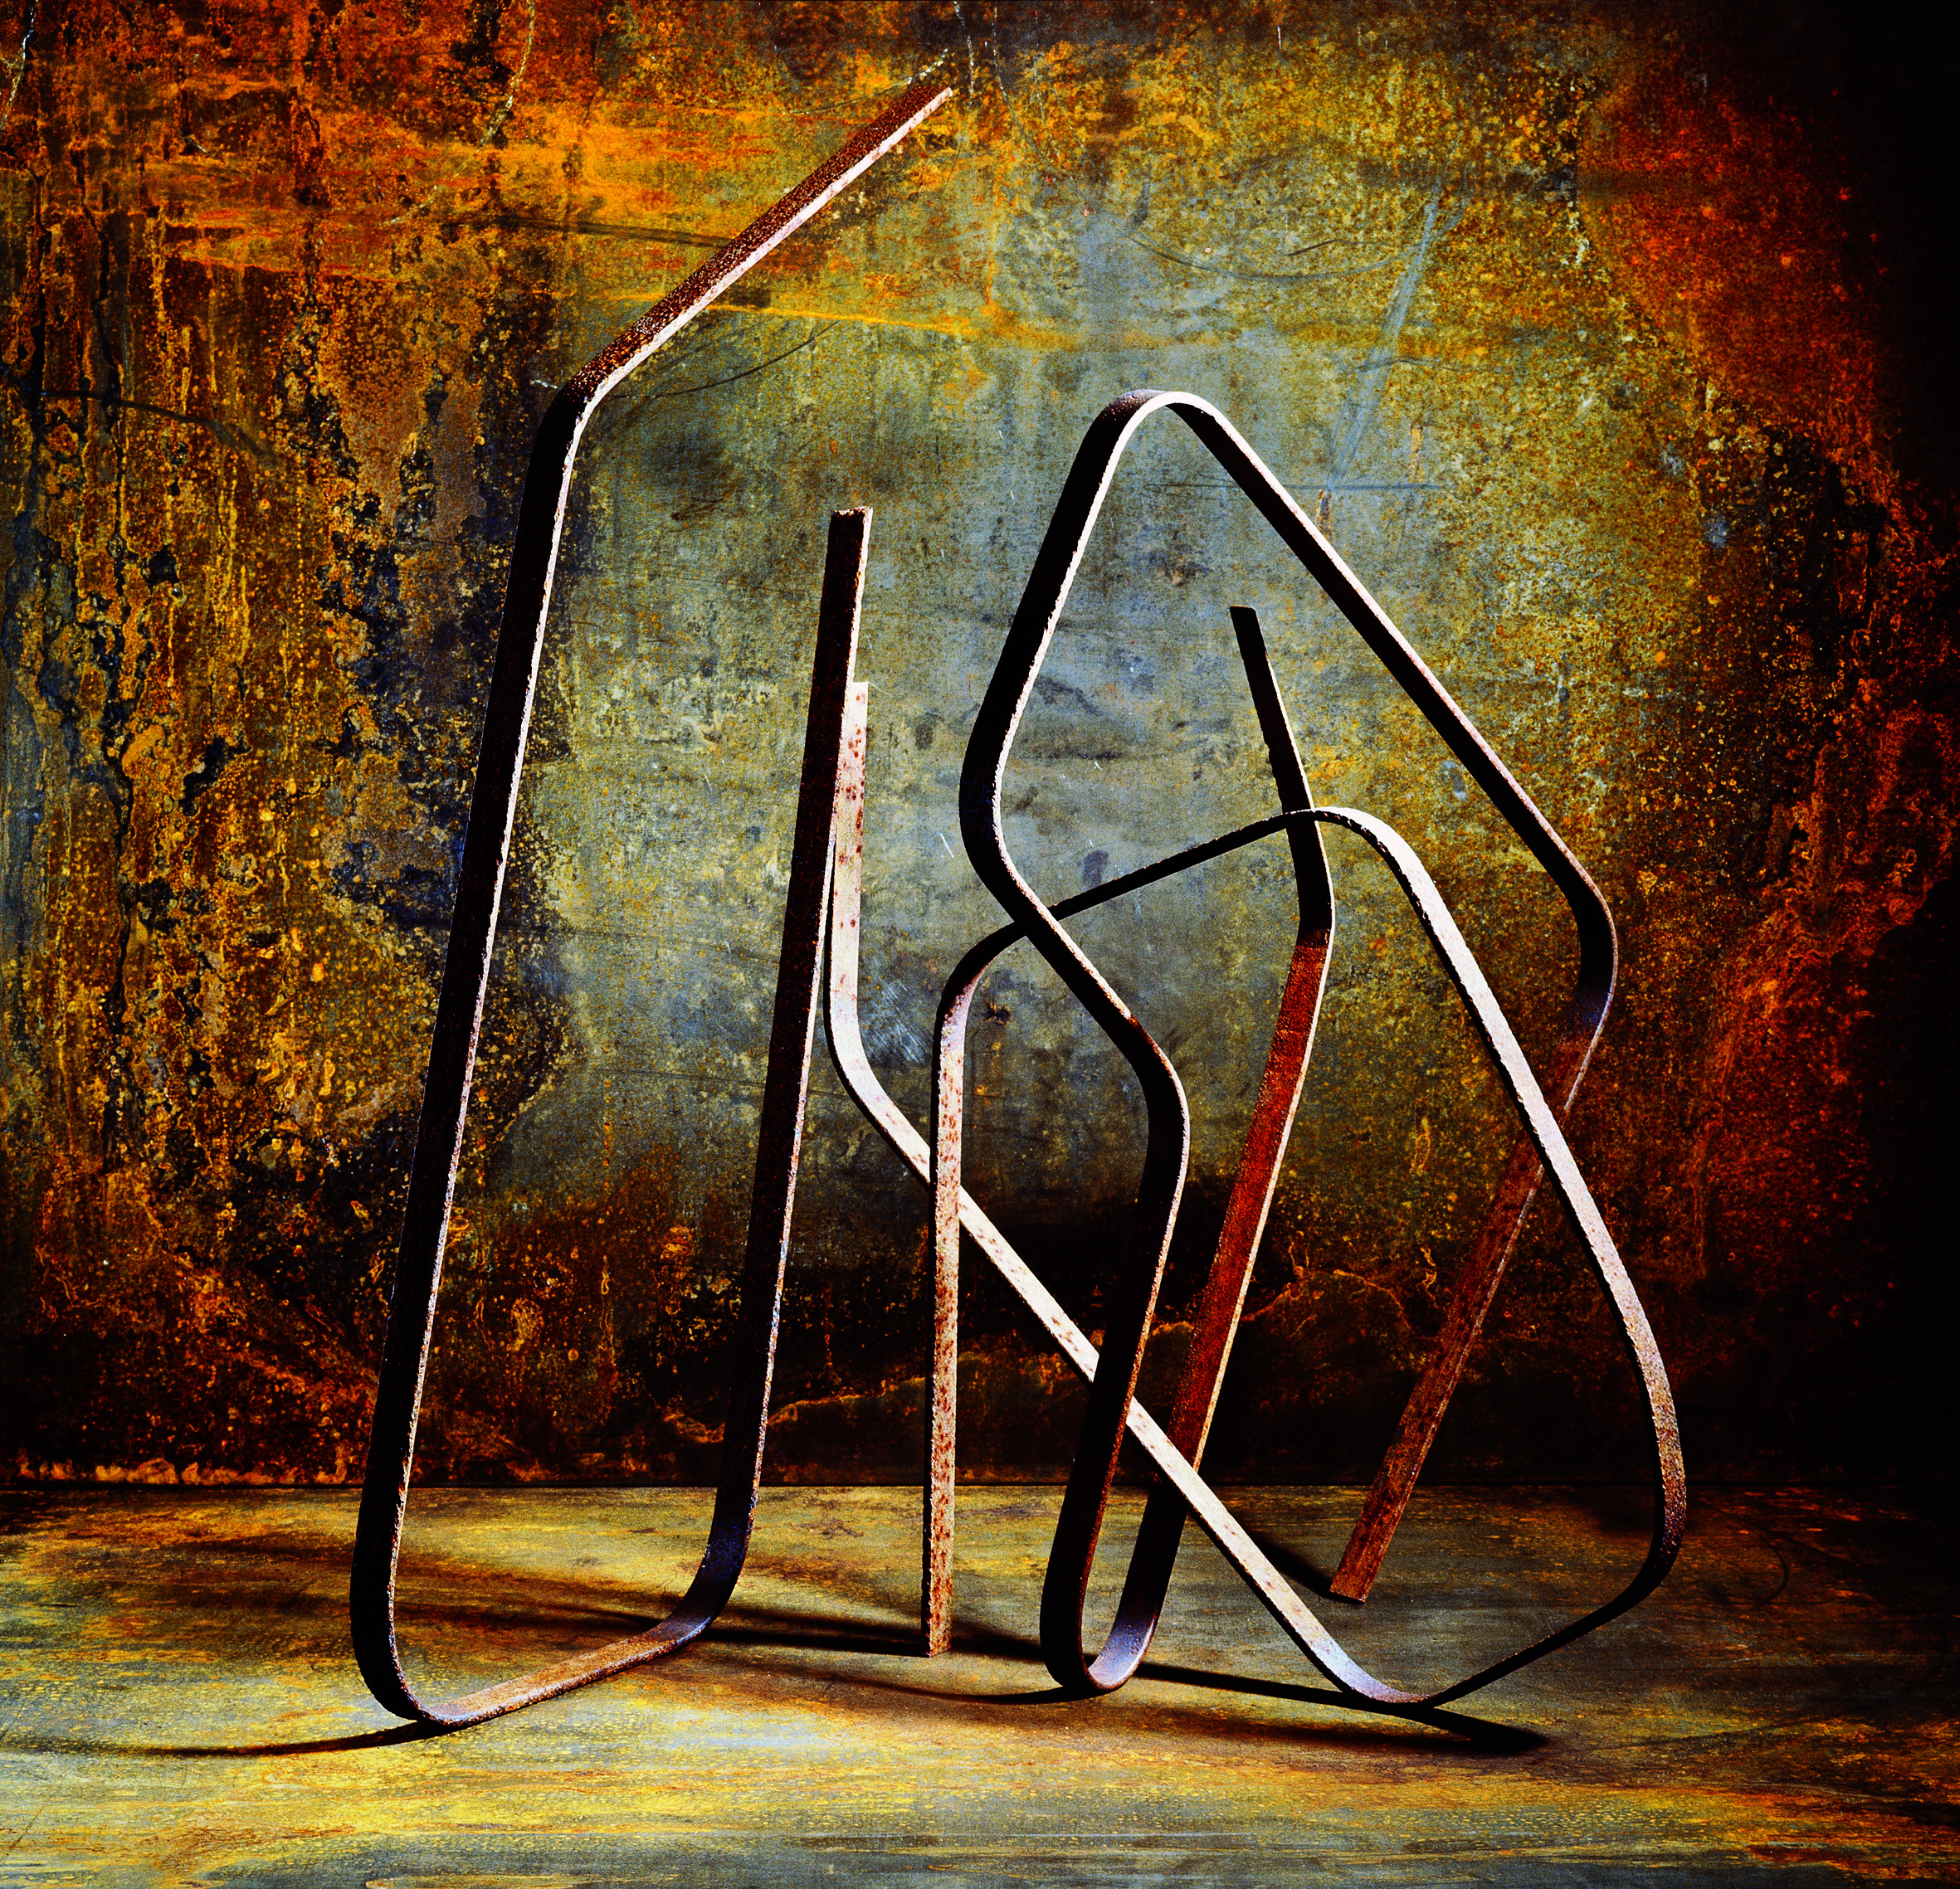 beatrice-helg-equilibre-xii-2002